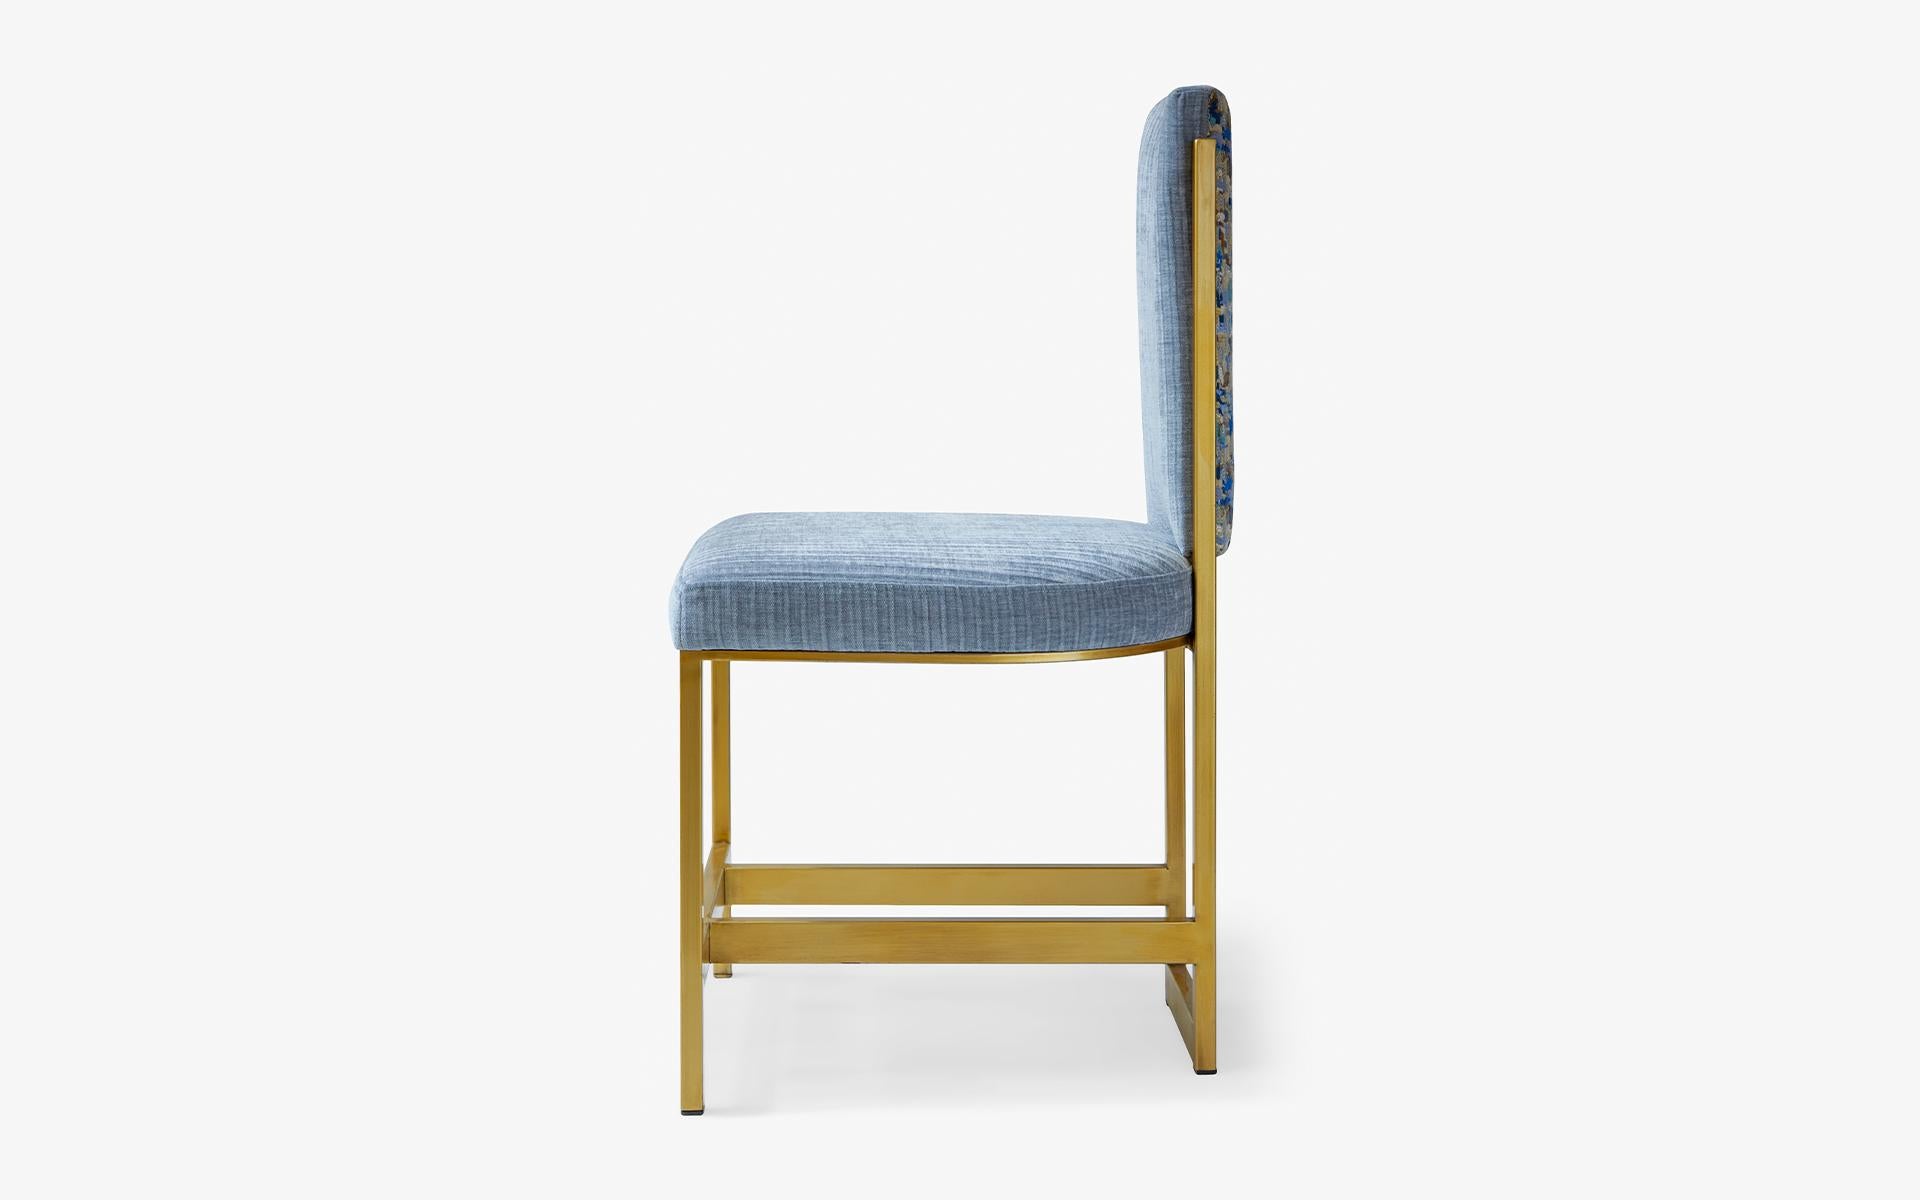 The recalled kenzo blue chair brings out your resonance for antiquity with its fine workmanship and aesthetic form combined with practical comfort.

Measures: length: 17.7'' / depth: 20.9'' / height: 36.2'' / seat height: 17.7''
Weight: 9.9